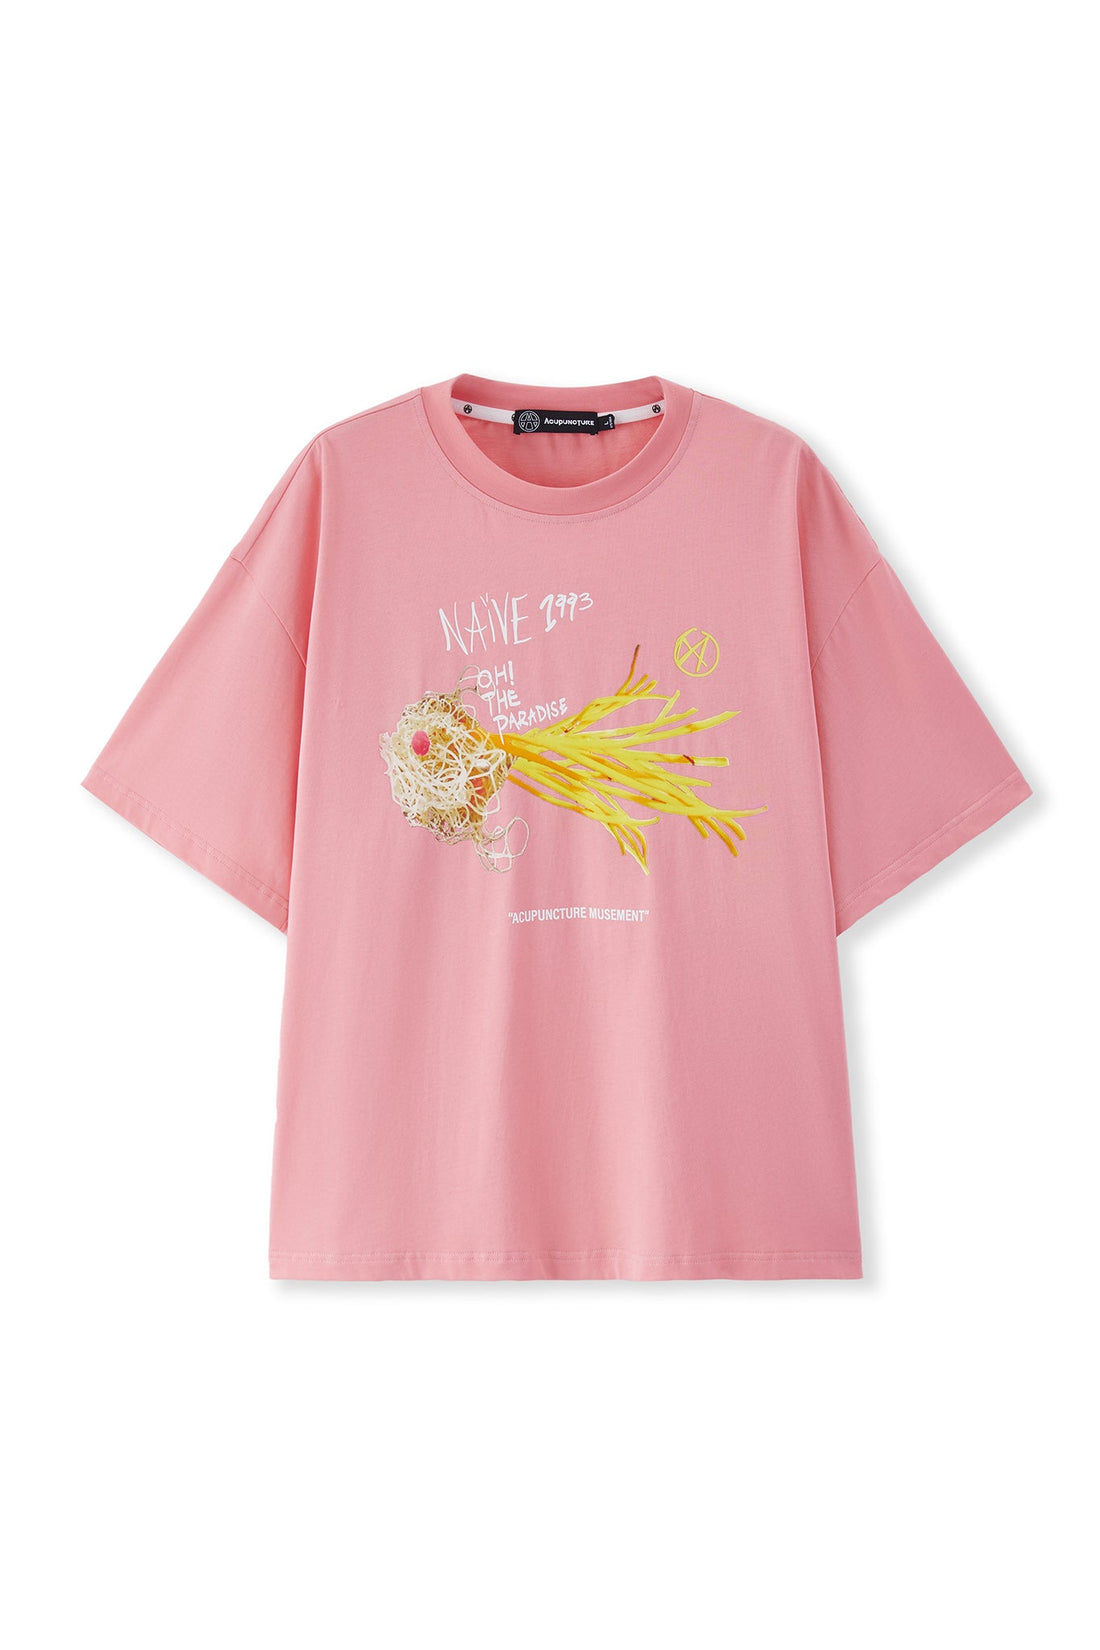 THE POLLUTED TSHIRT PINK Acupuncture